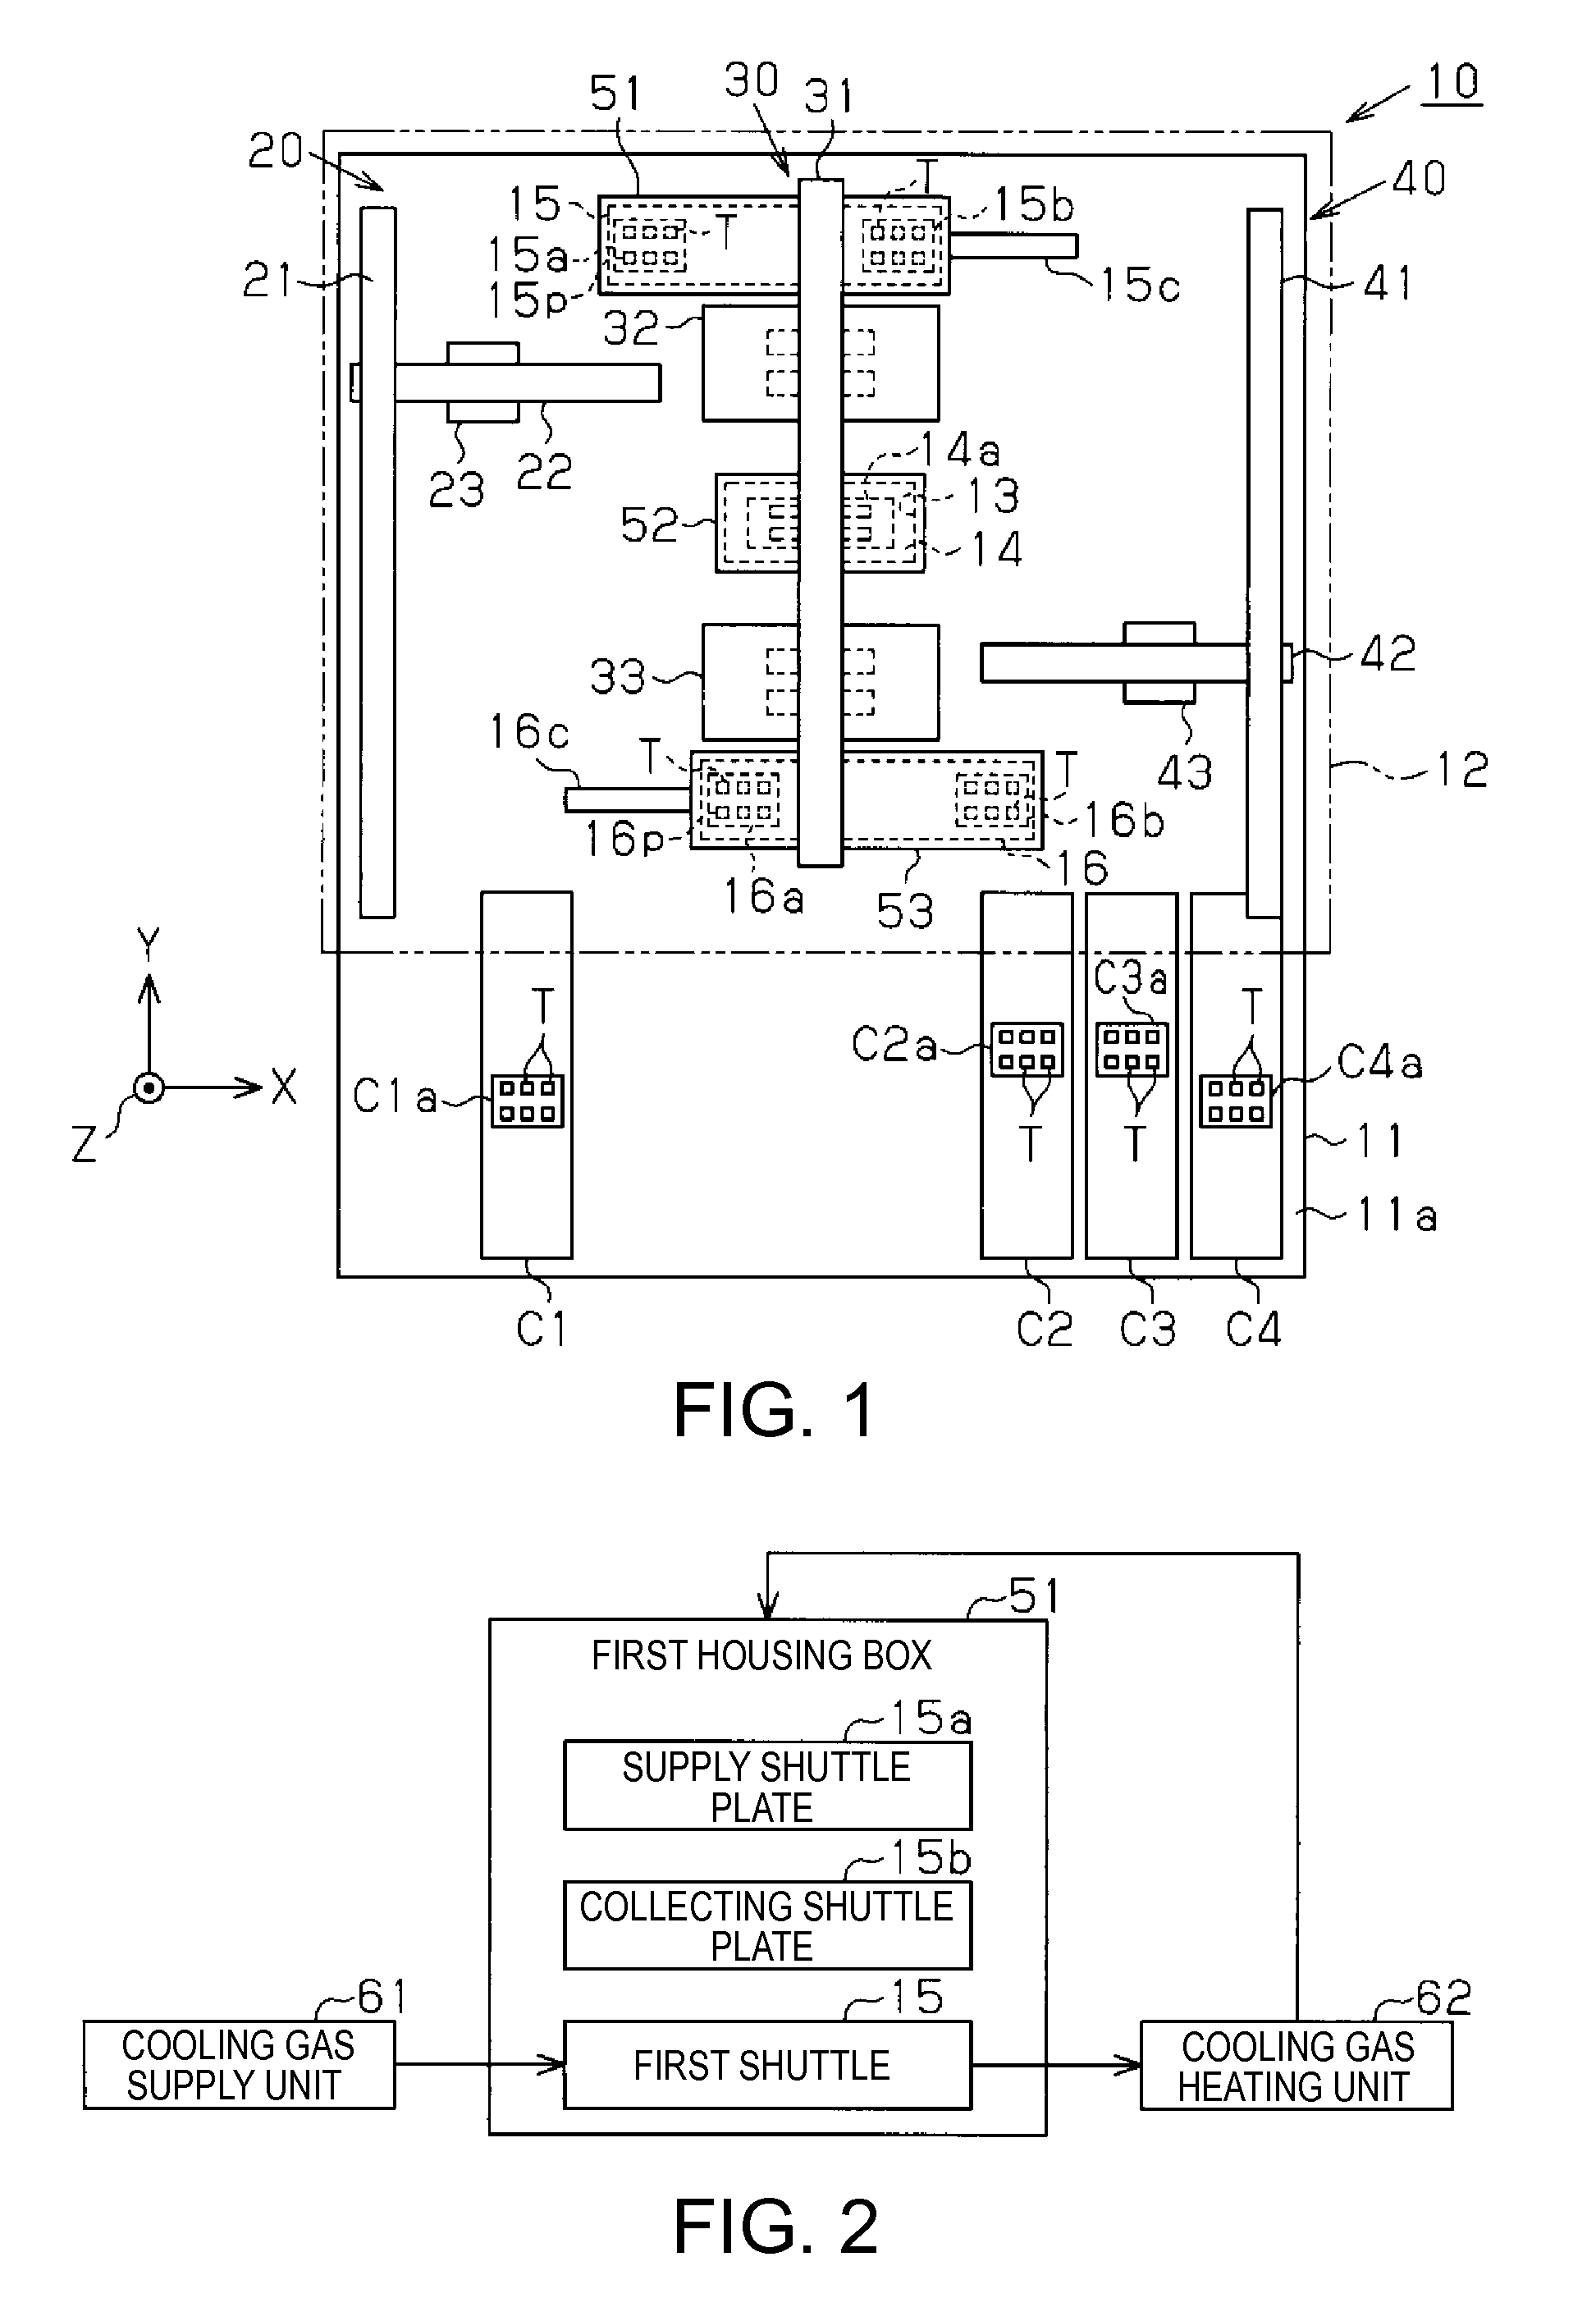 Part inspection apparatus and handler